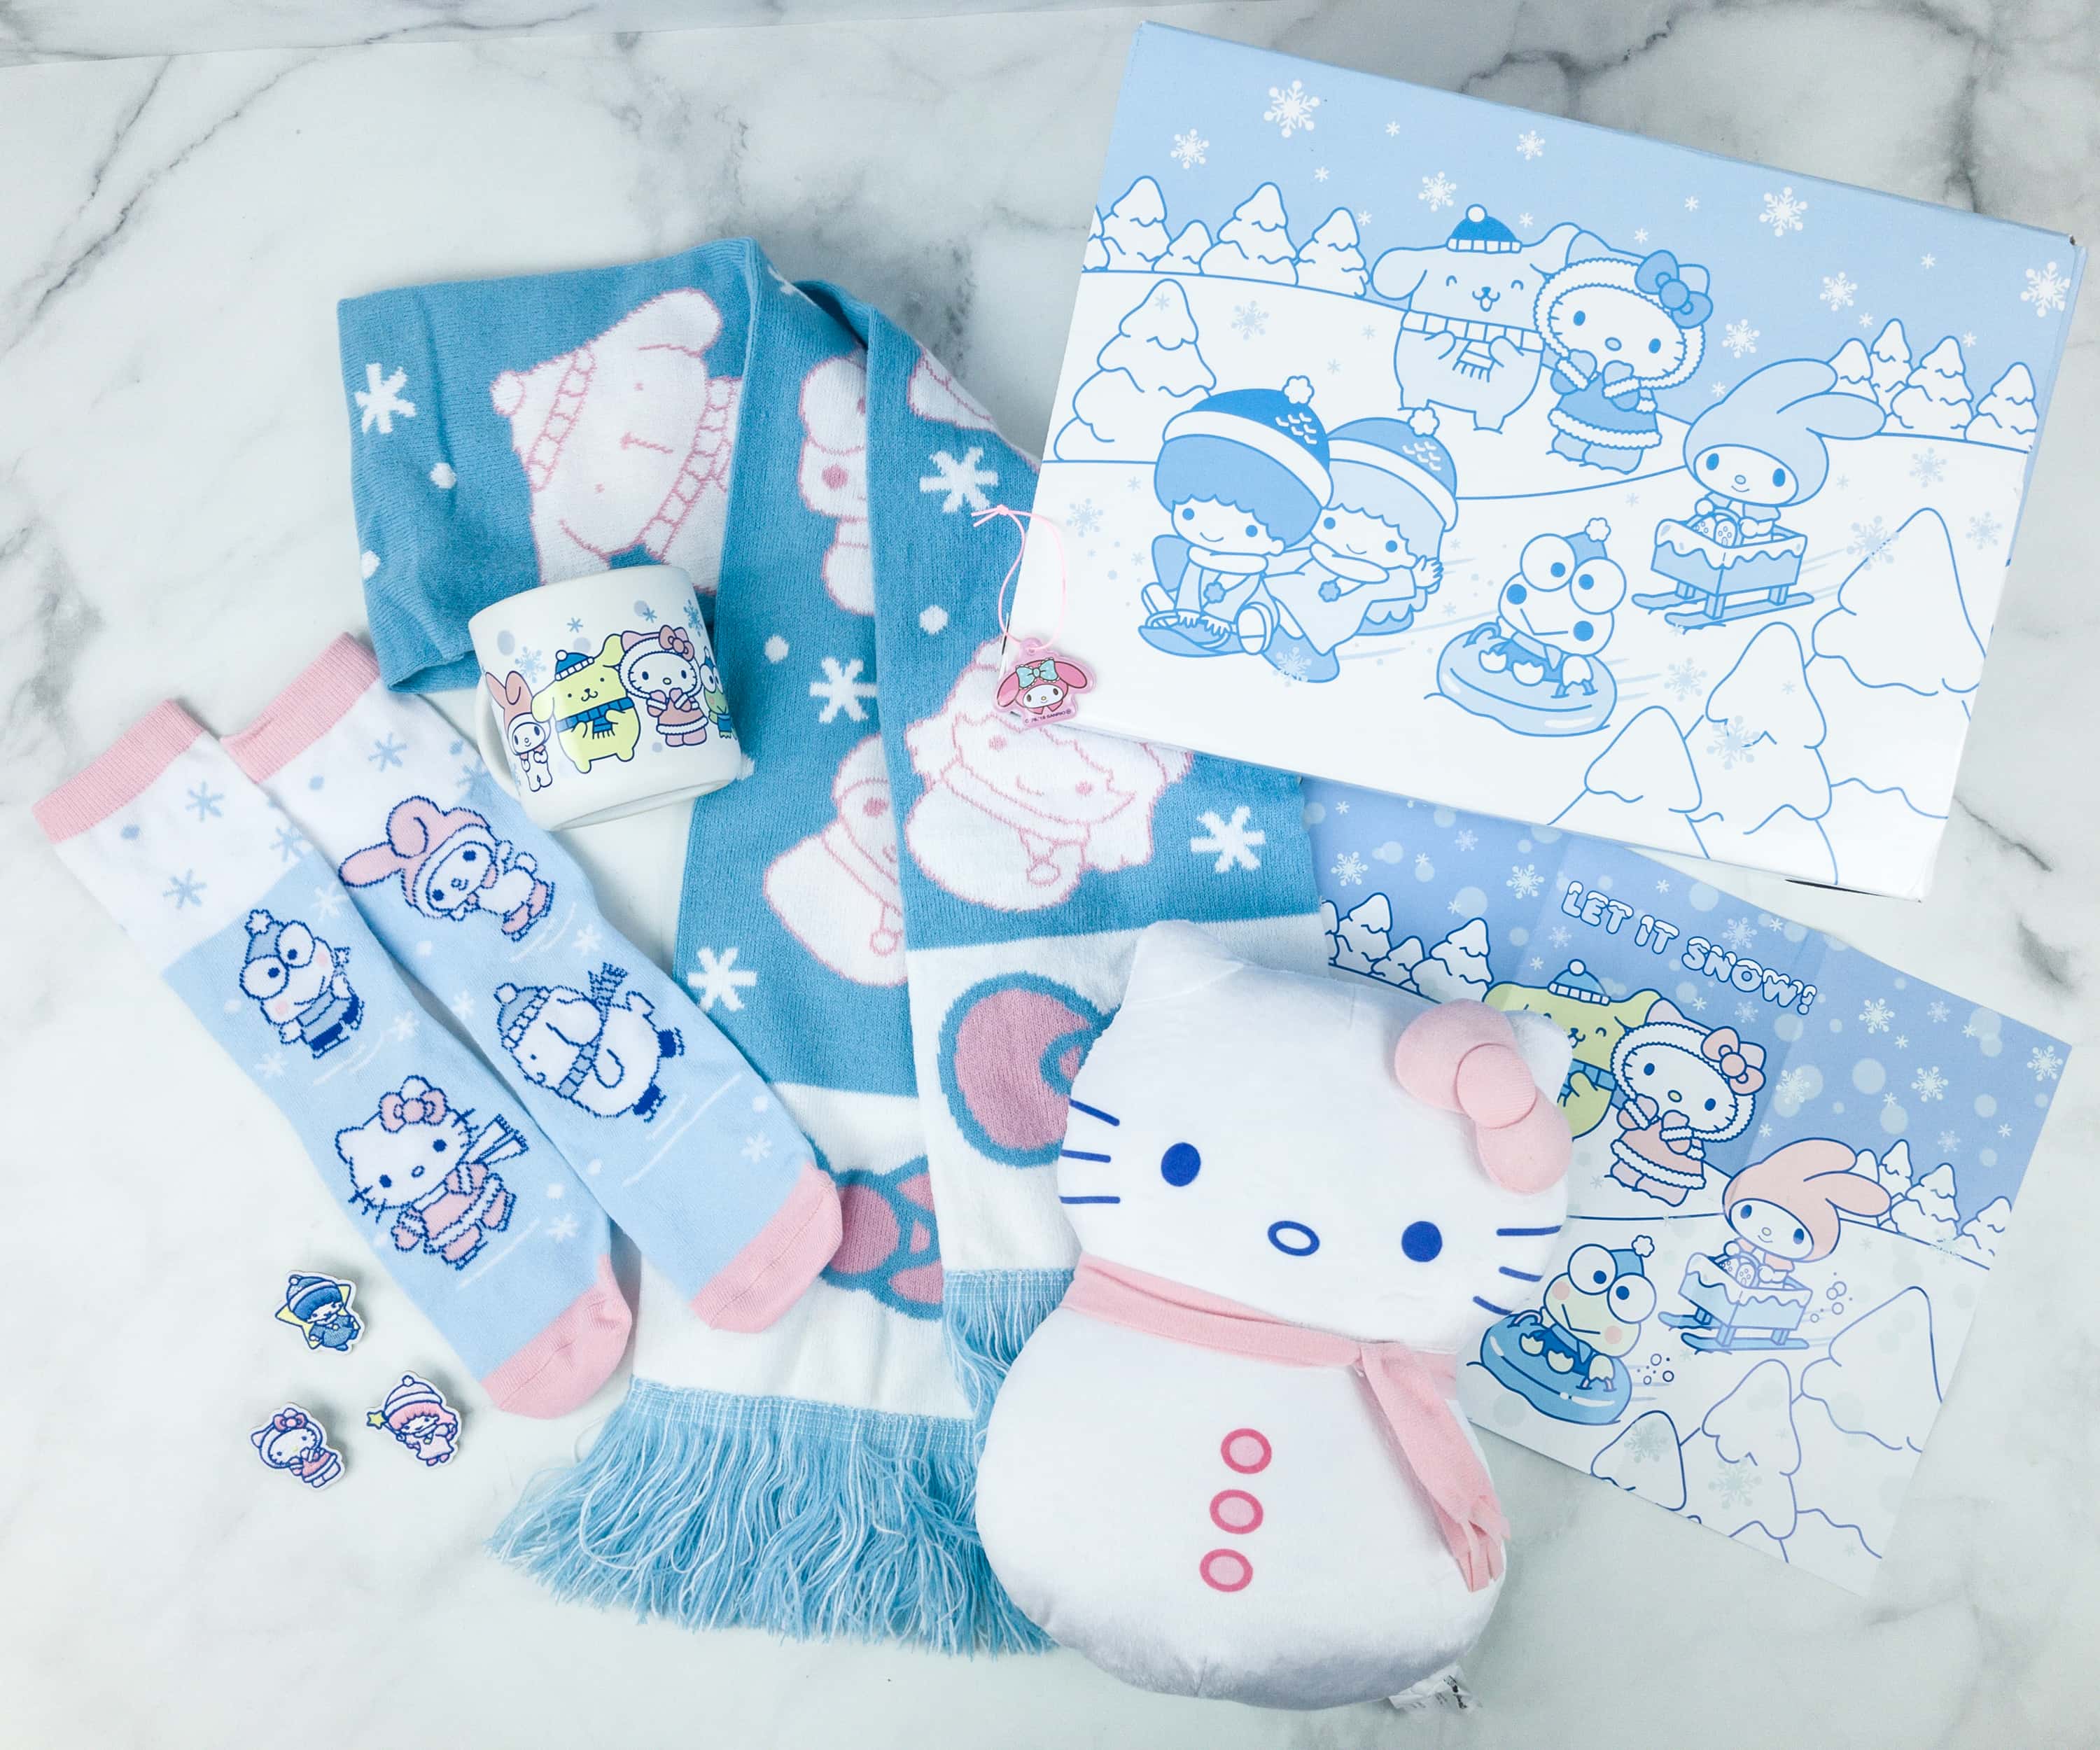 Details about   Lootcrate Sanrio Blue with Stars Hello Kitty Sweet Dreams Throw Blanket 44"x62" 